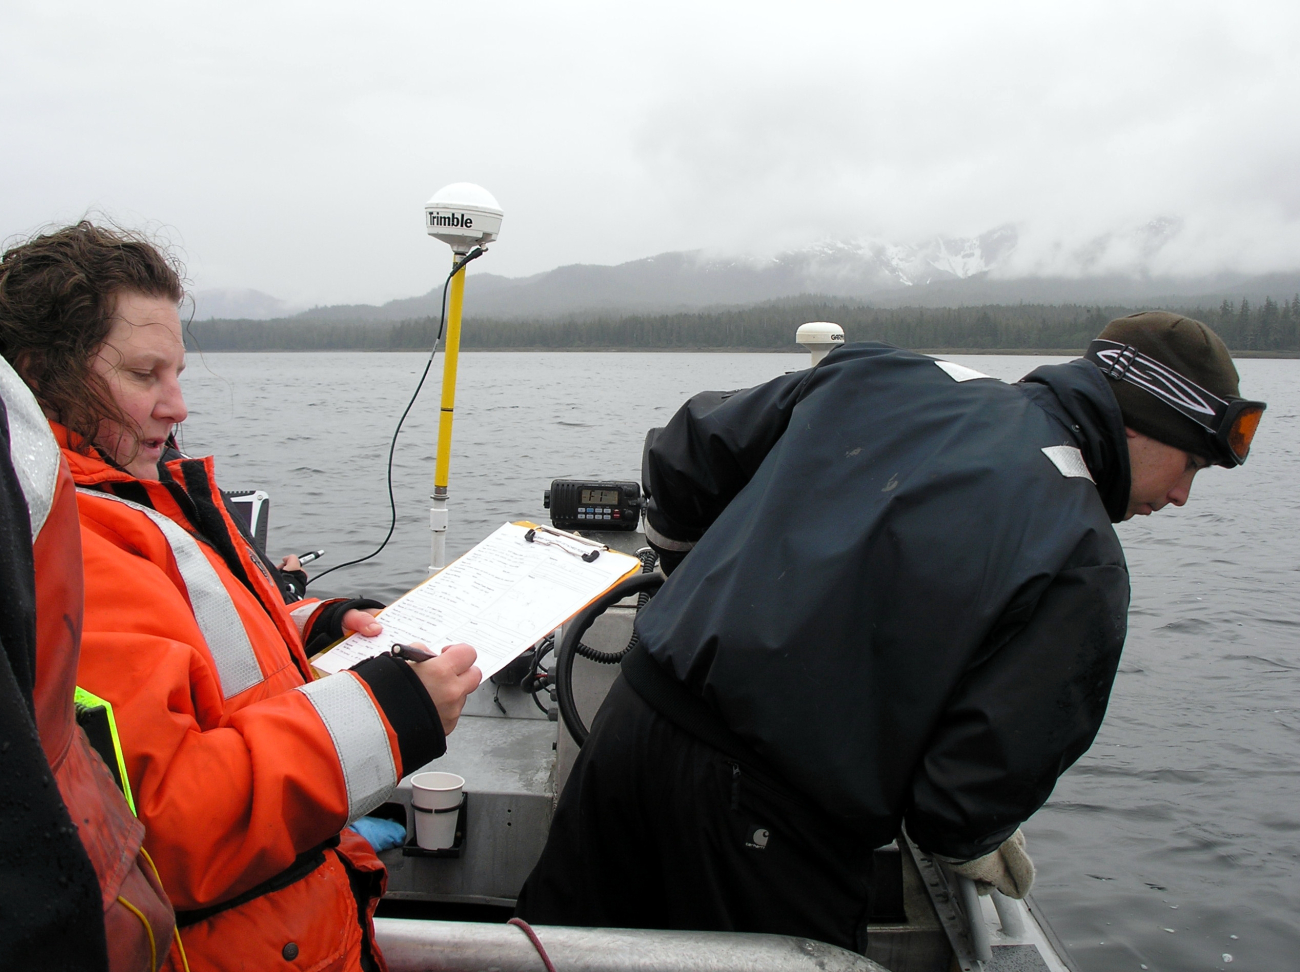 Small boat with Trimble GPS receiver being used for shoreline mapping and aerial photography editing